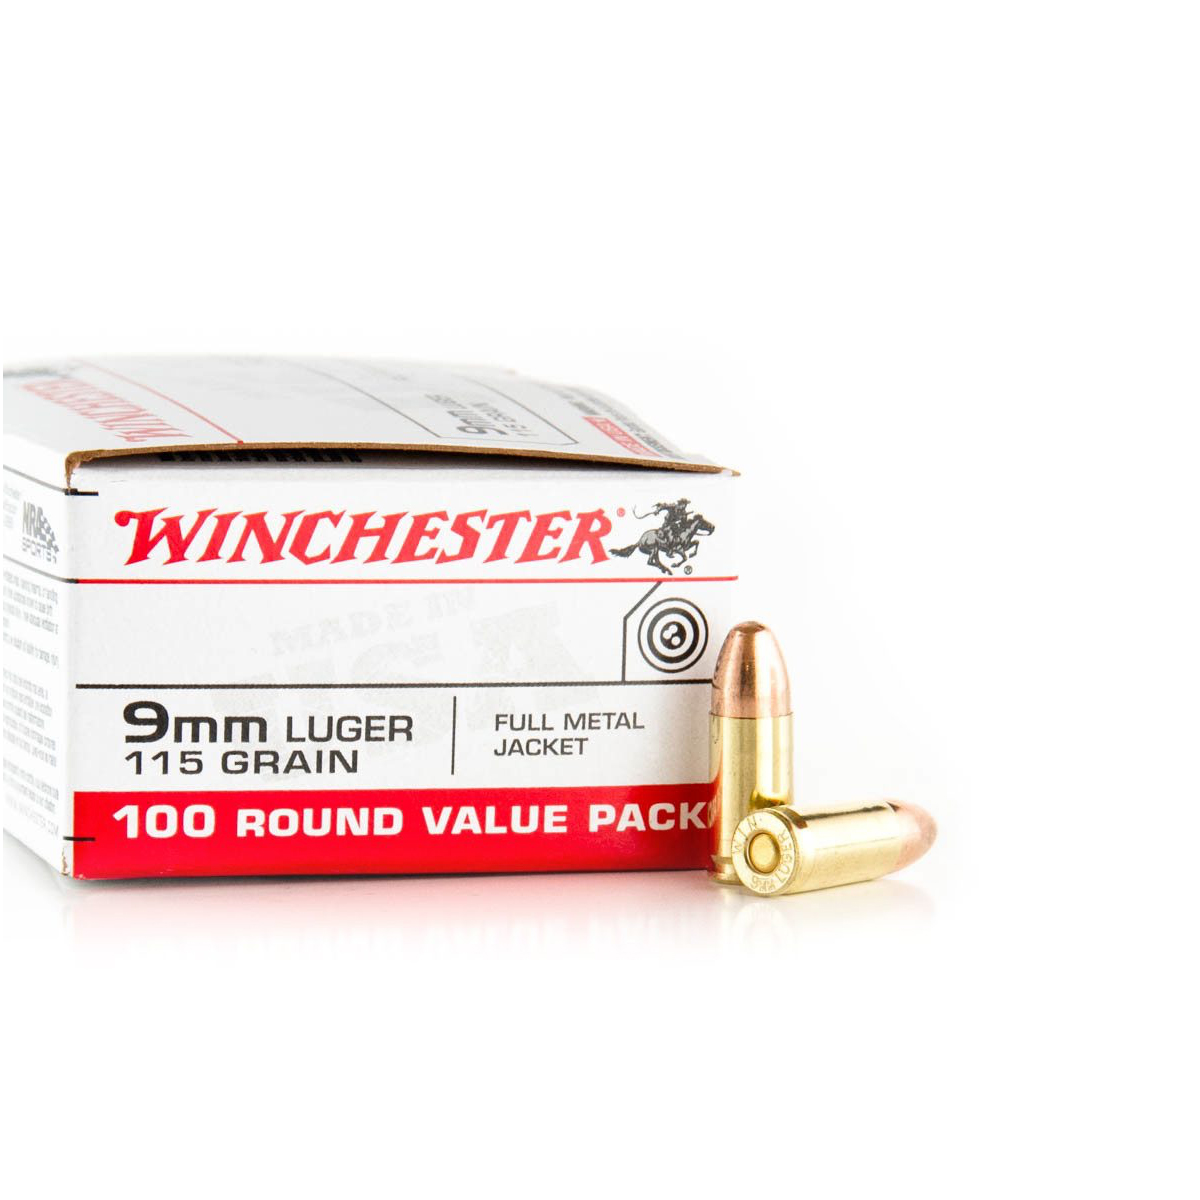 Winchester 9mm Value Pack – 100 Rounds